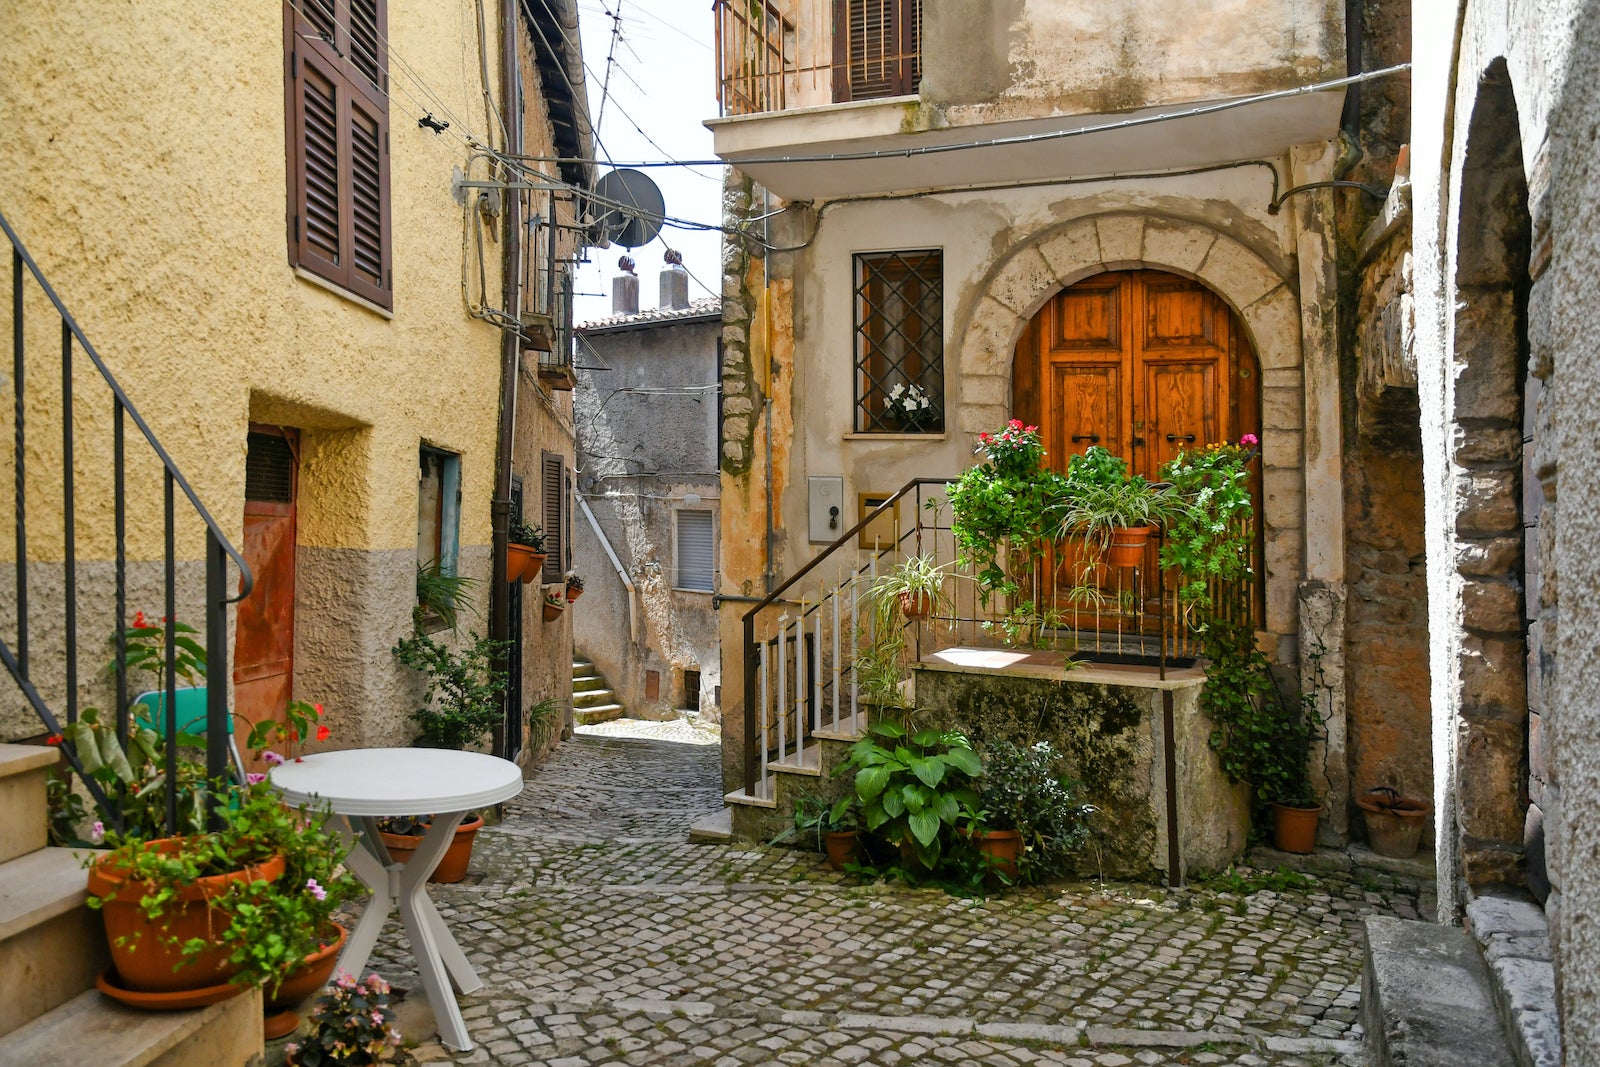 Another Italian village near Rome offers up homes for just 1 euro